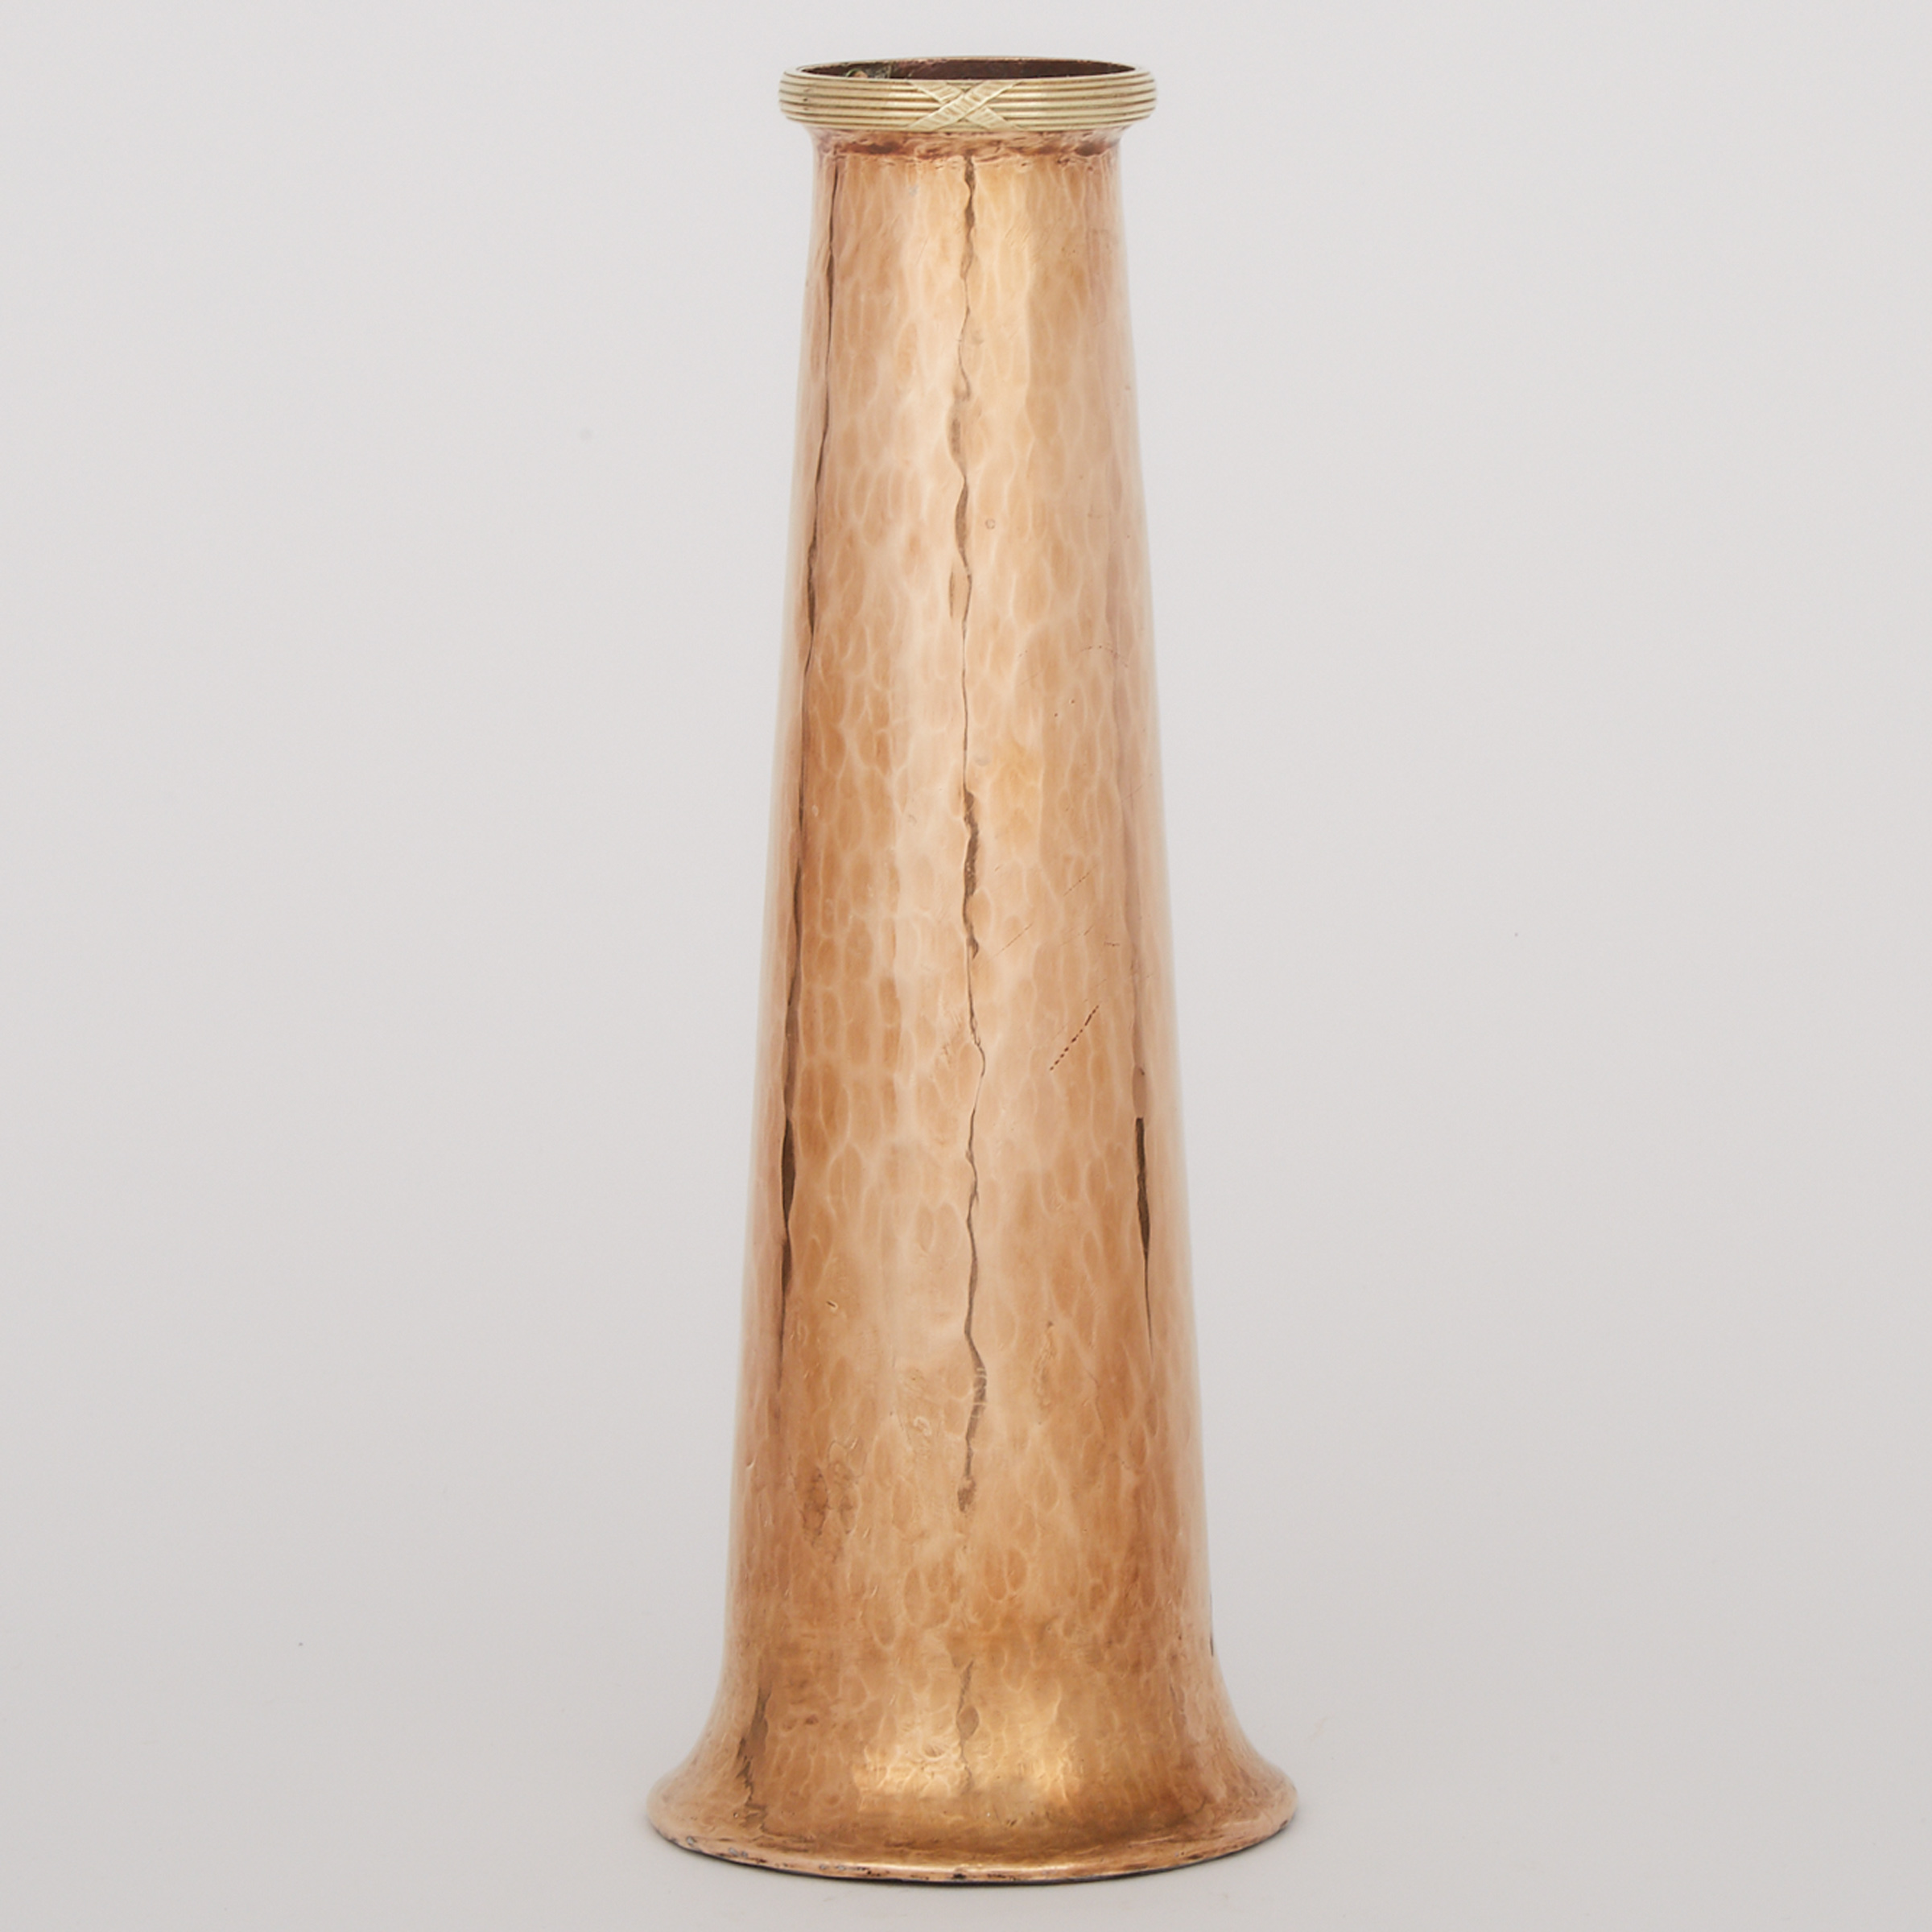 Paul Beau (Canadian, 1871-1941) Brass Vase, Montreal, early 20th century